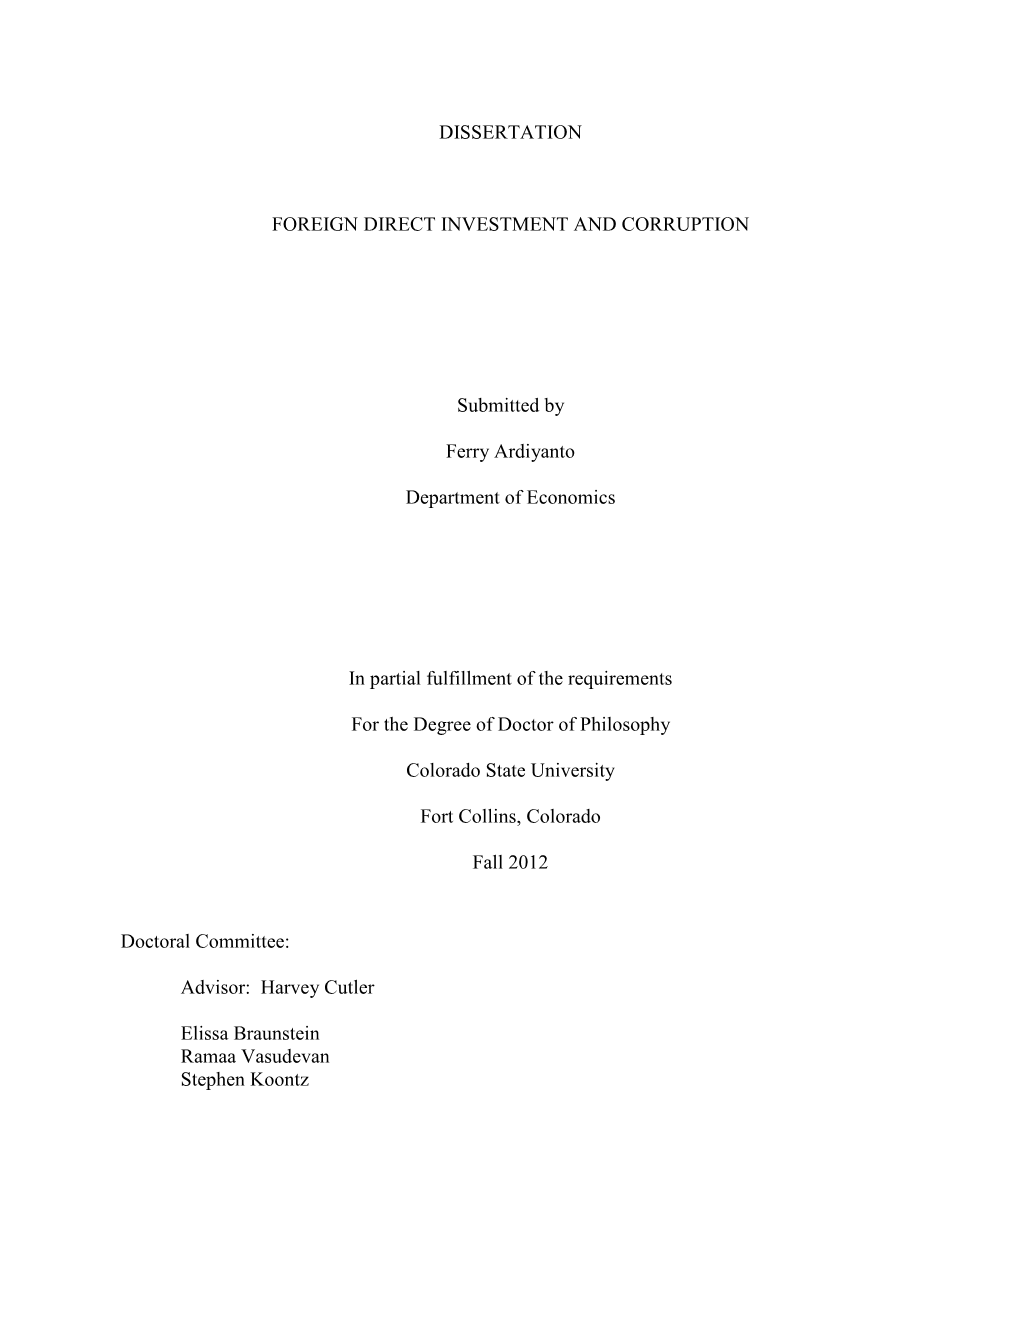 DISSERTATION FOREIGN DIRECT INVESTMENT and CORRUPTION Submitted by Ferry Ardiyanto Department of Economics in Partial Fulfillm